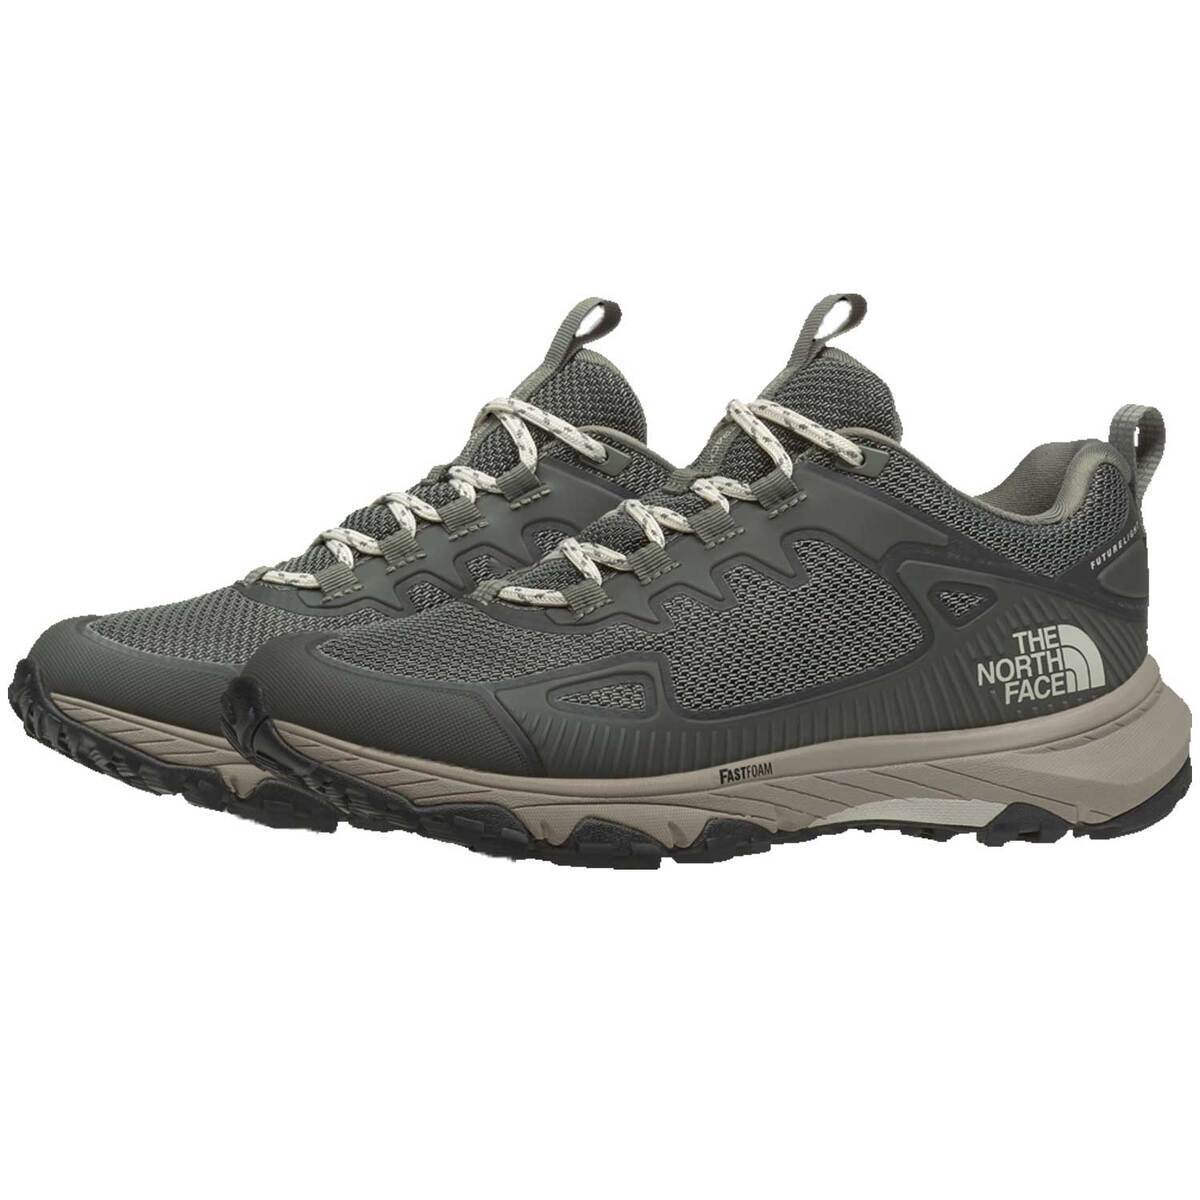 The North Face Women's Ultra Fastpack IV Futurelight Waterproof Low Trail | Sportsman's Warehouse